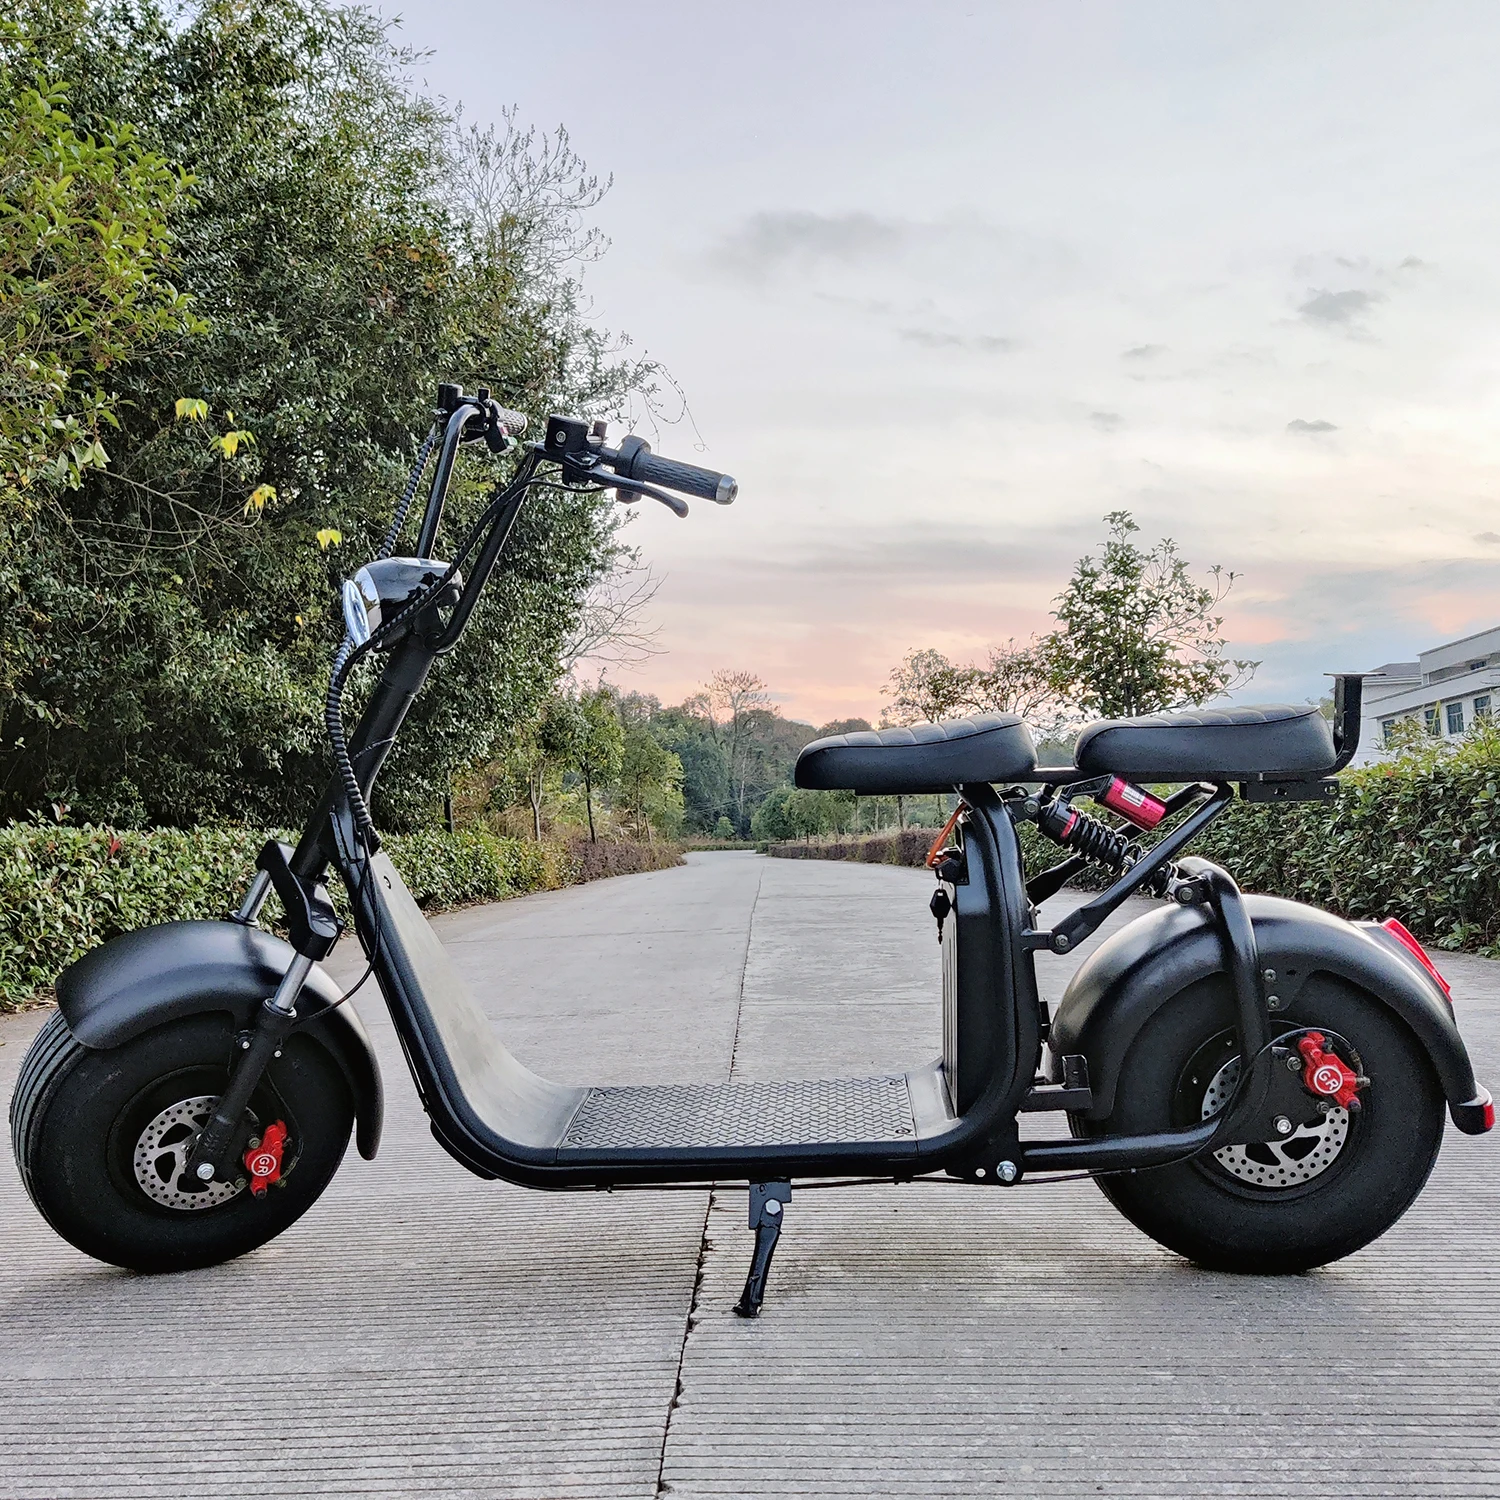 

2022 2 Wheel 2000W city coco europe Warehouse Stock High Speed Motorcycles Motor Light Electric Scooter Fat Tire citycoco Adult